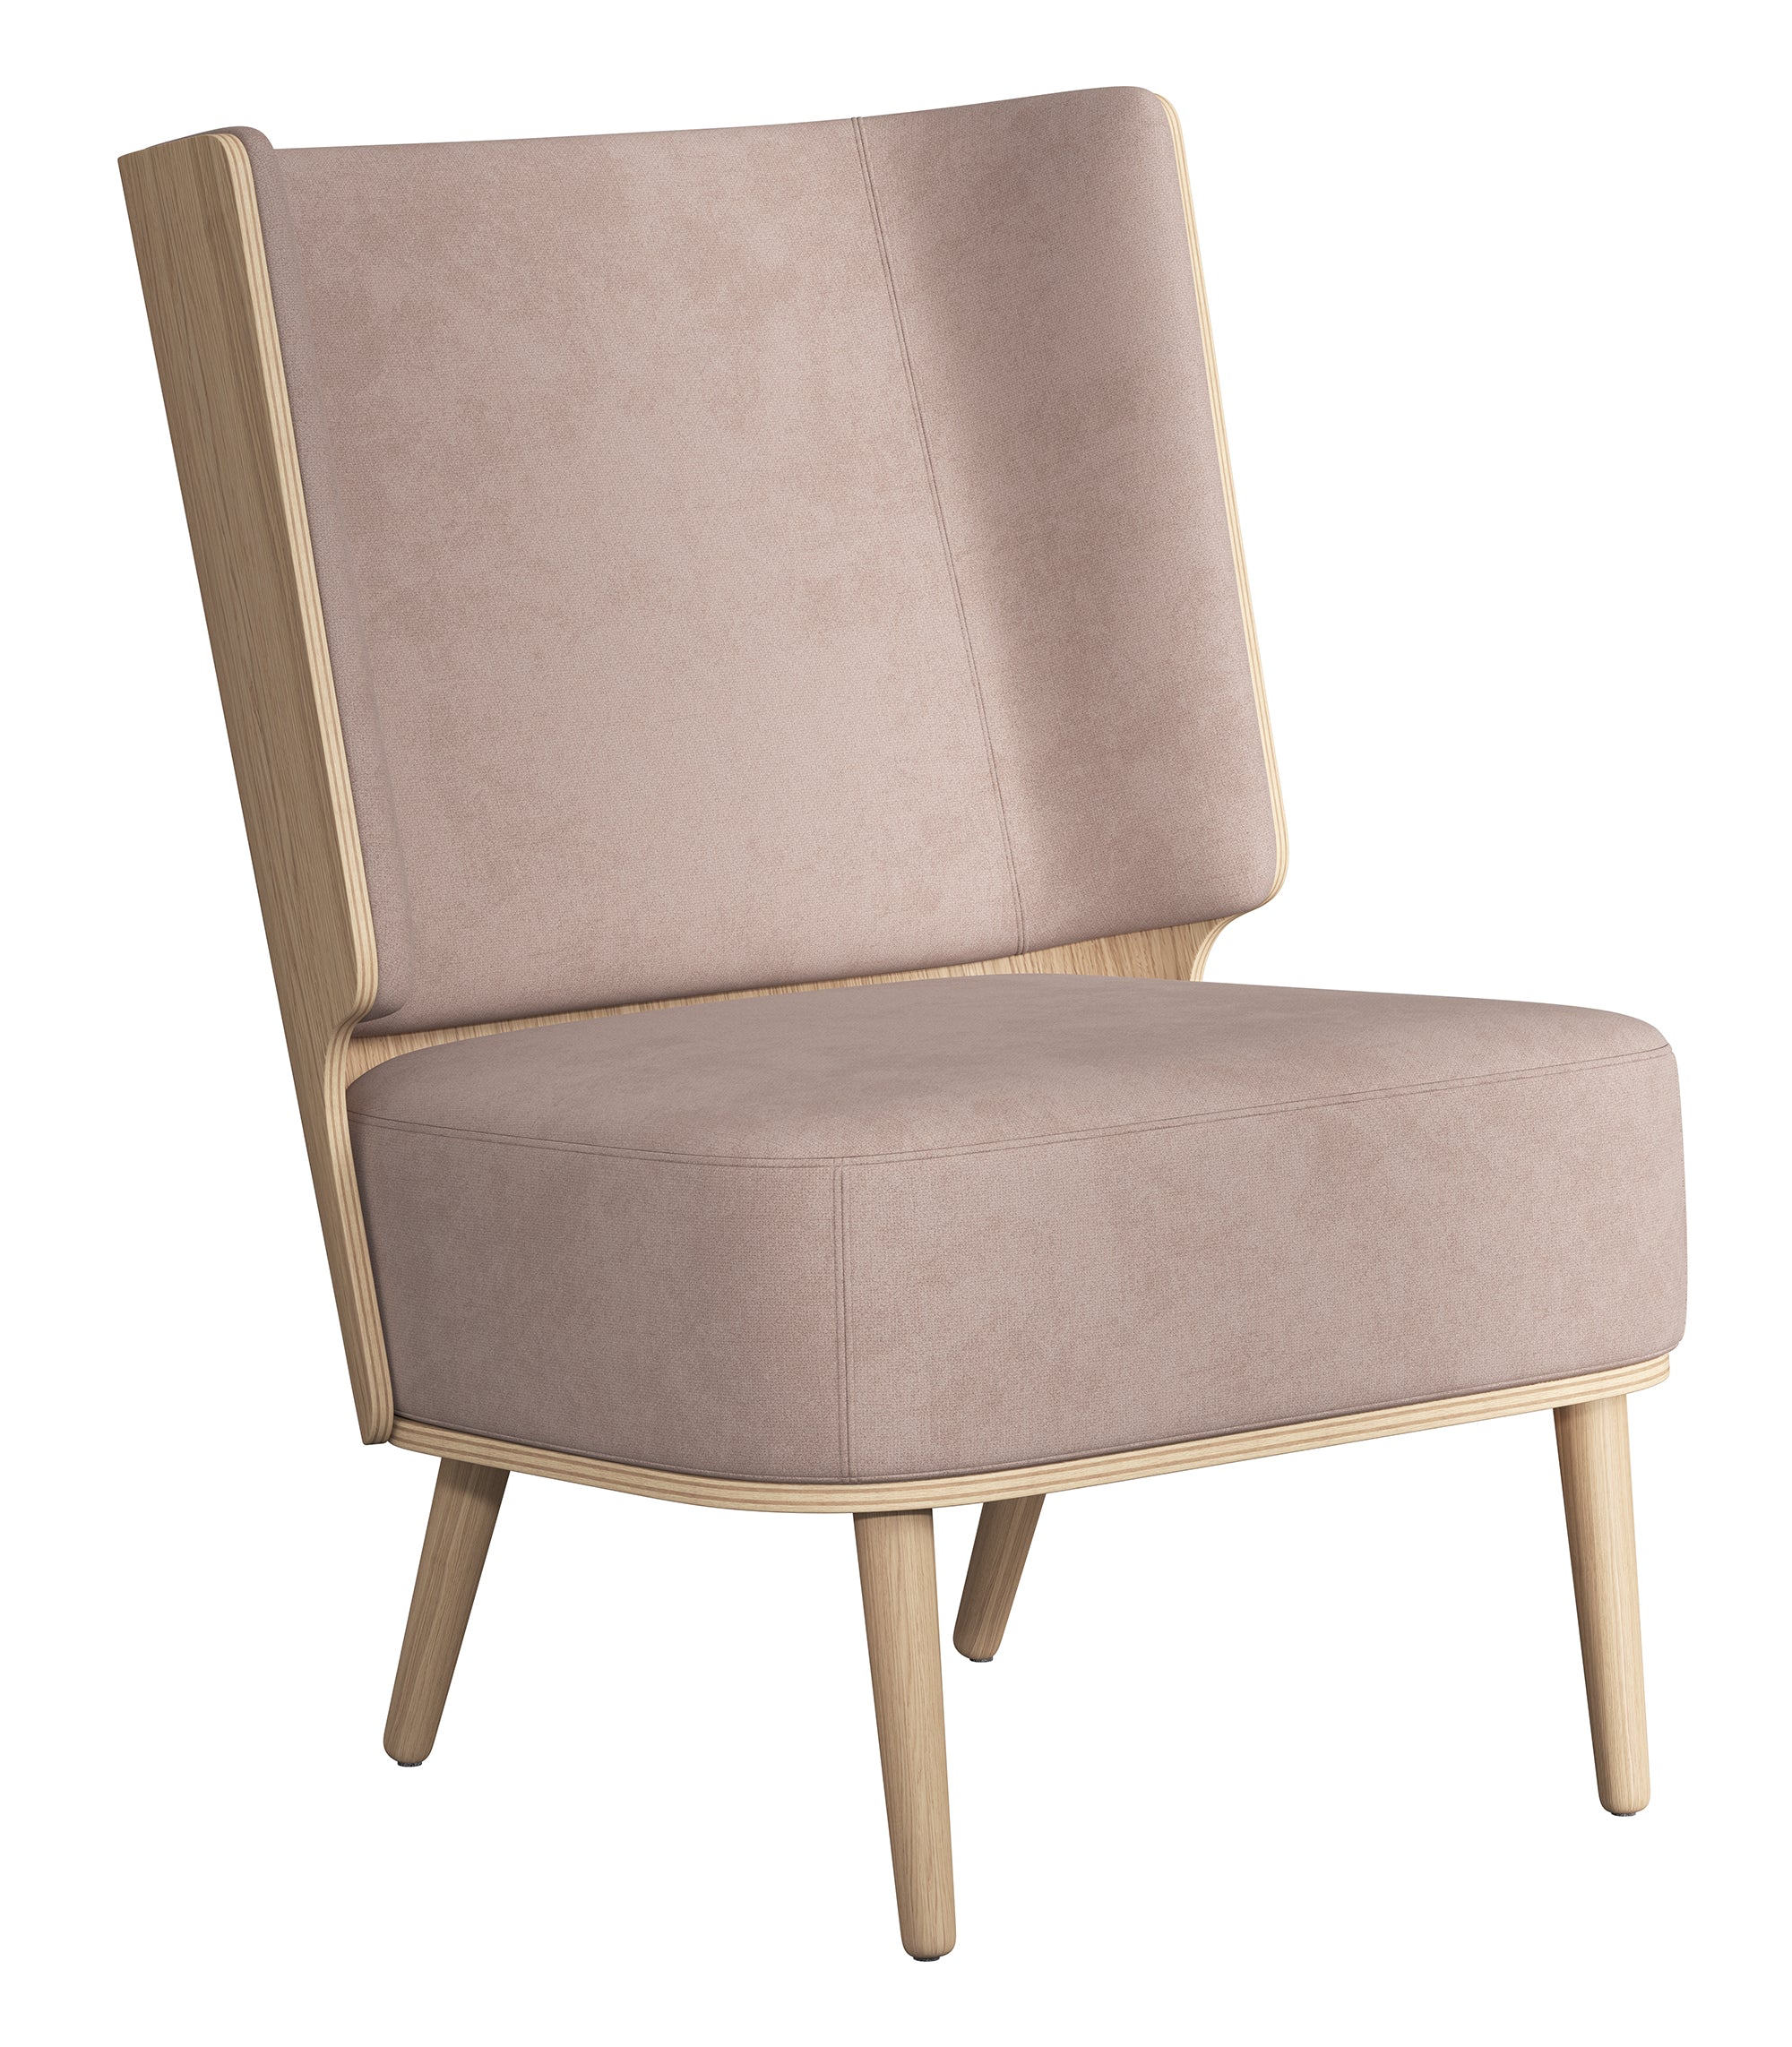 SERENA lounge chair - natural oak/dusty rose